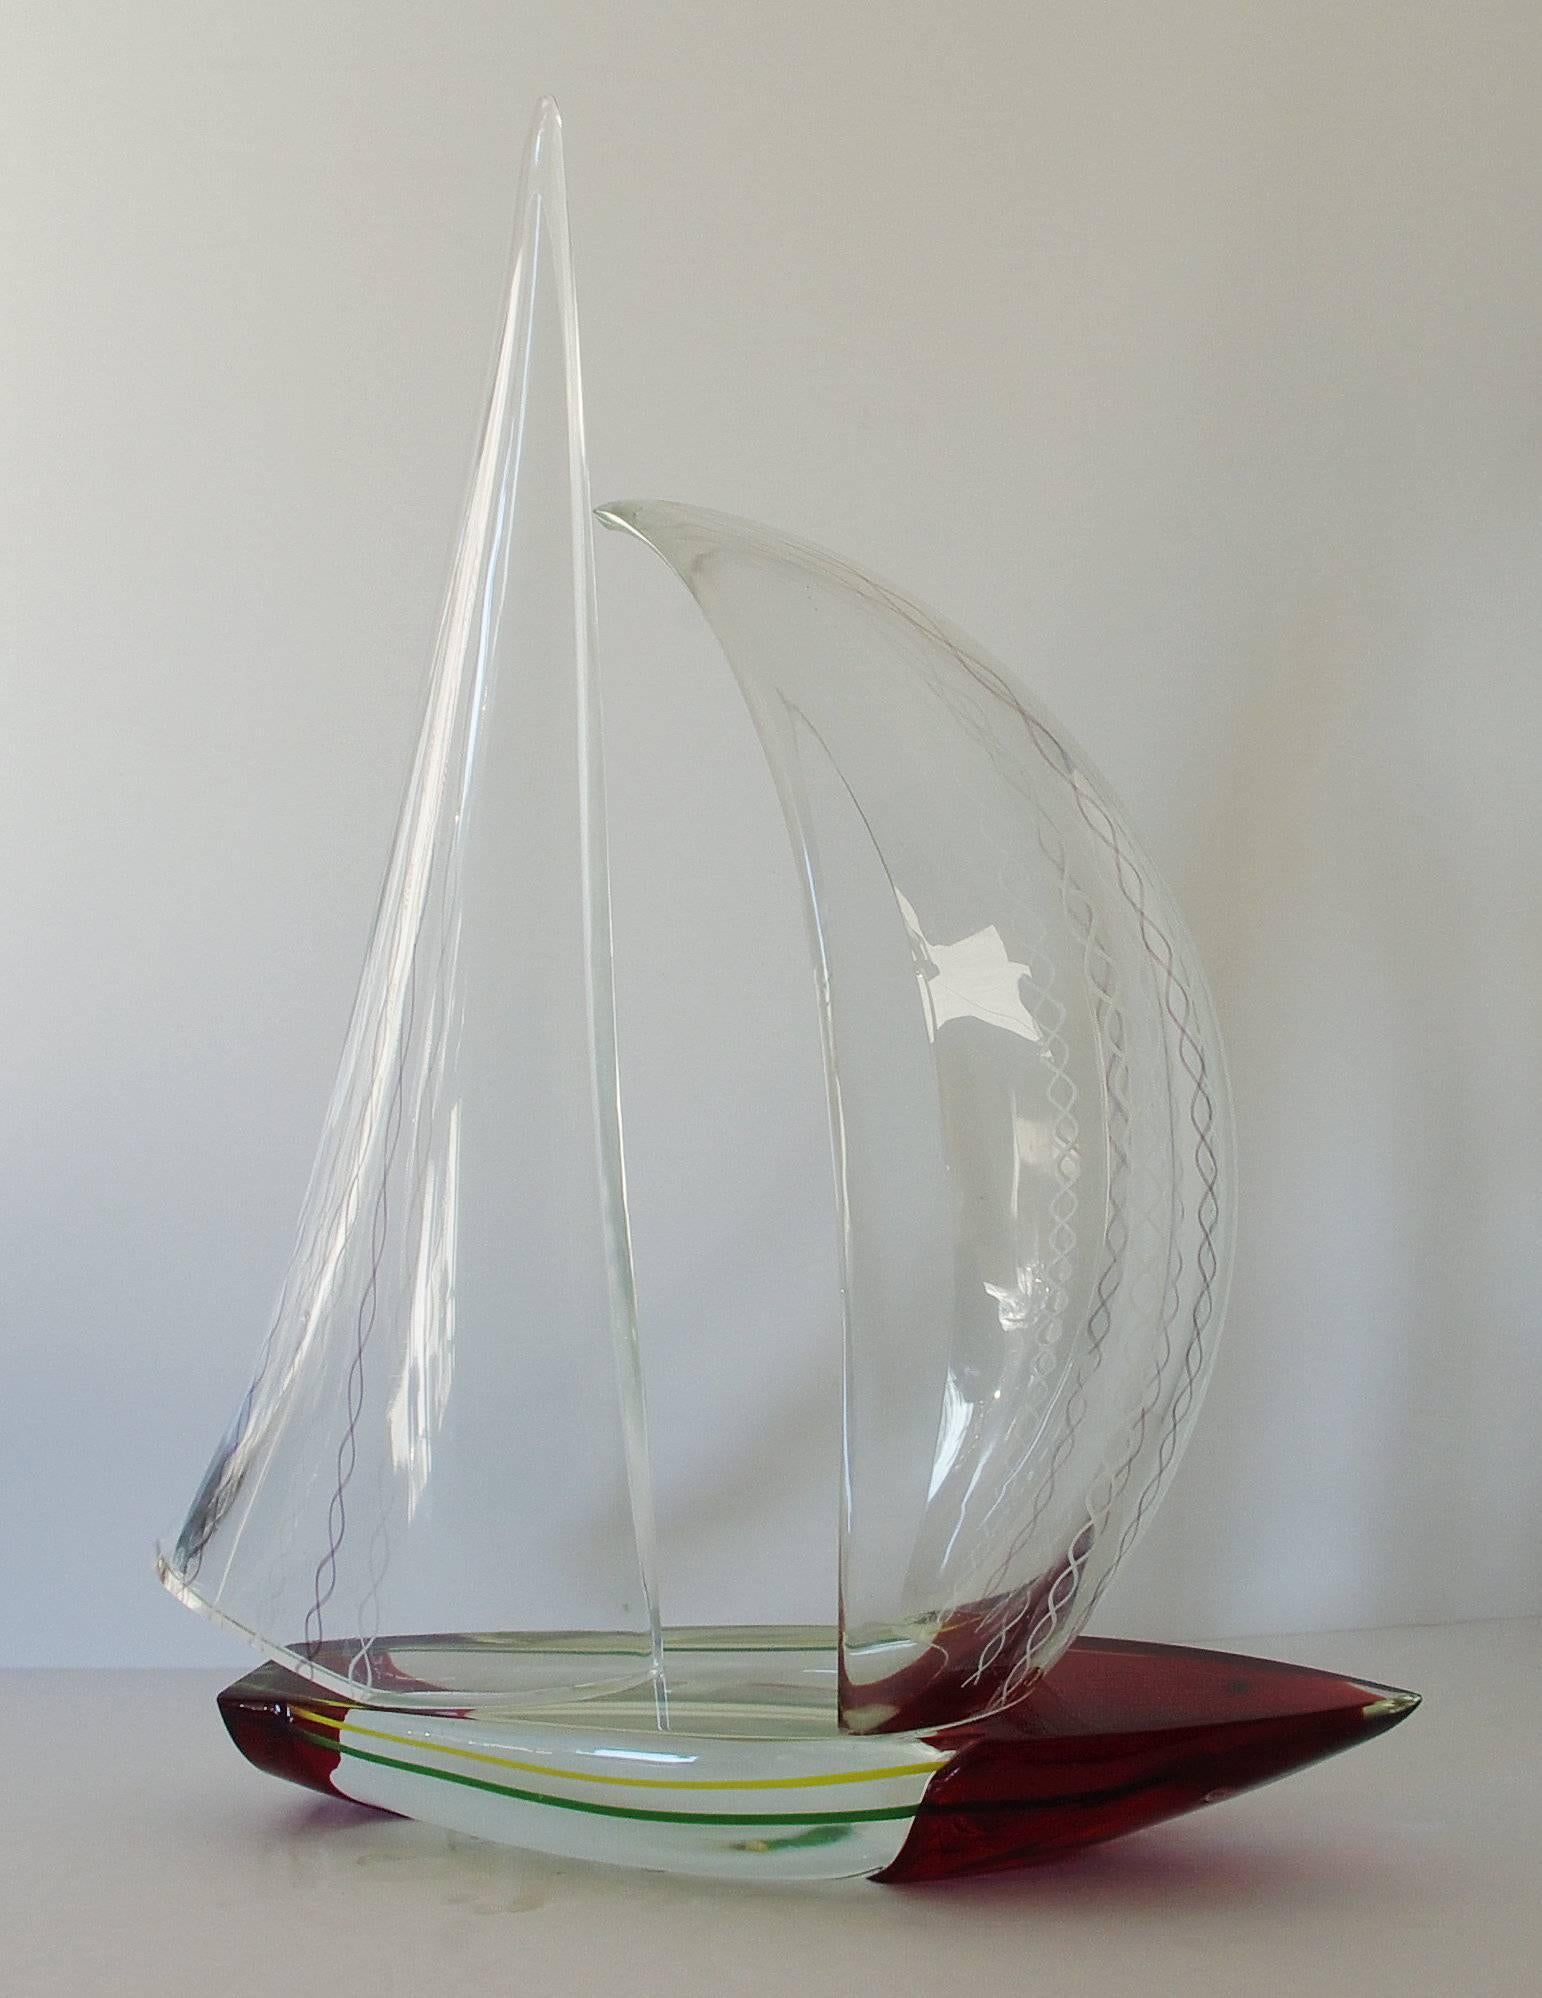 Vintage Italian double sail boat hand blown and crafted in clear and dark red Murano glass by Alberto Dona'
Signed “Alberto Dona” on the base / Made in Italy in the 1980’s 
Height: 22 inches / Width: 18 inches / Depth: 7 inches 
1 in stock in Palm